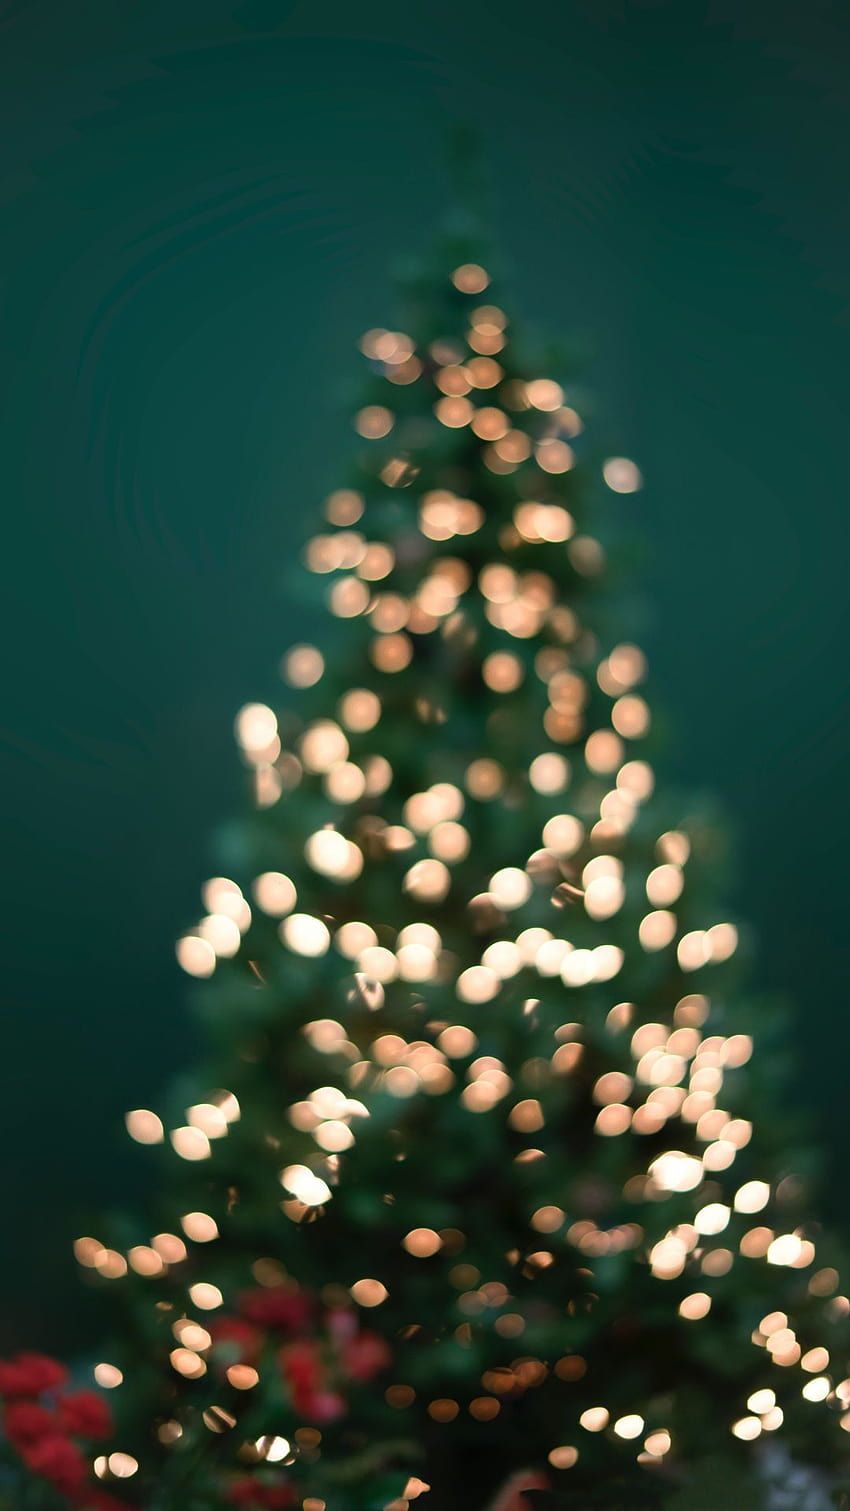 A blurred Christmas tree with white lights in the dark. - Christmas lights